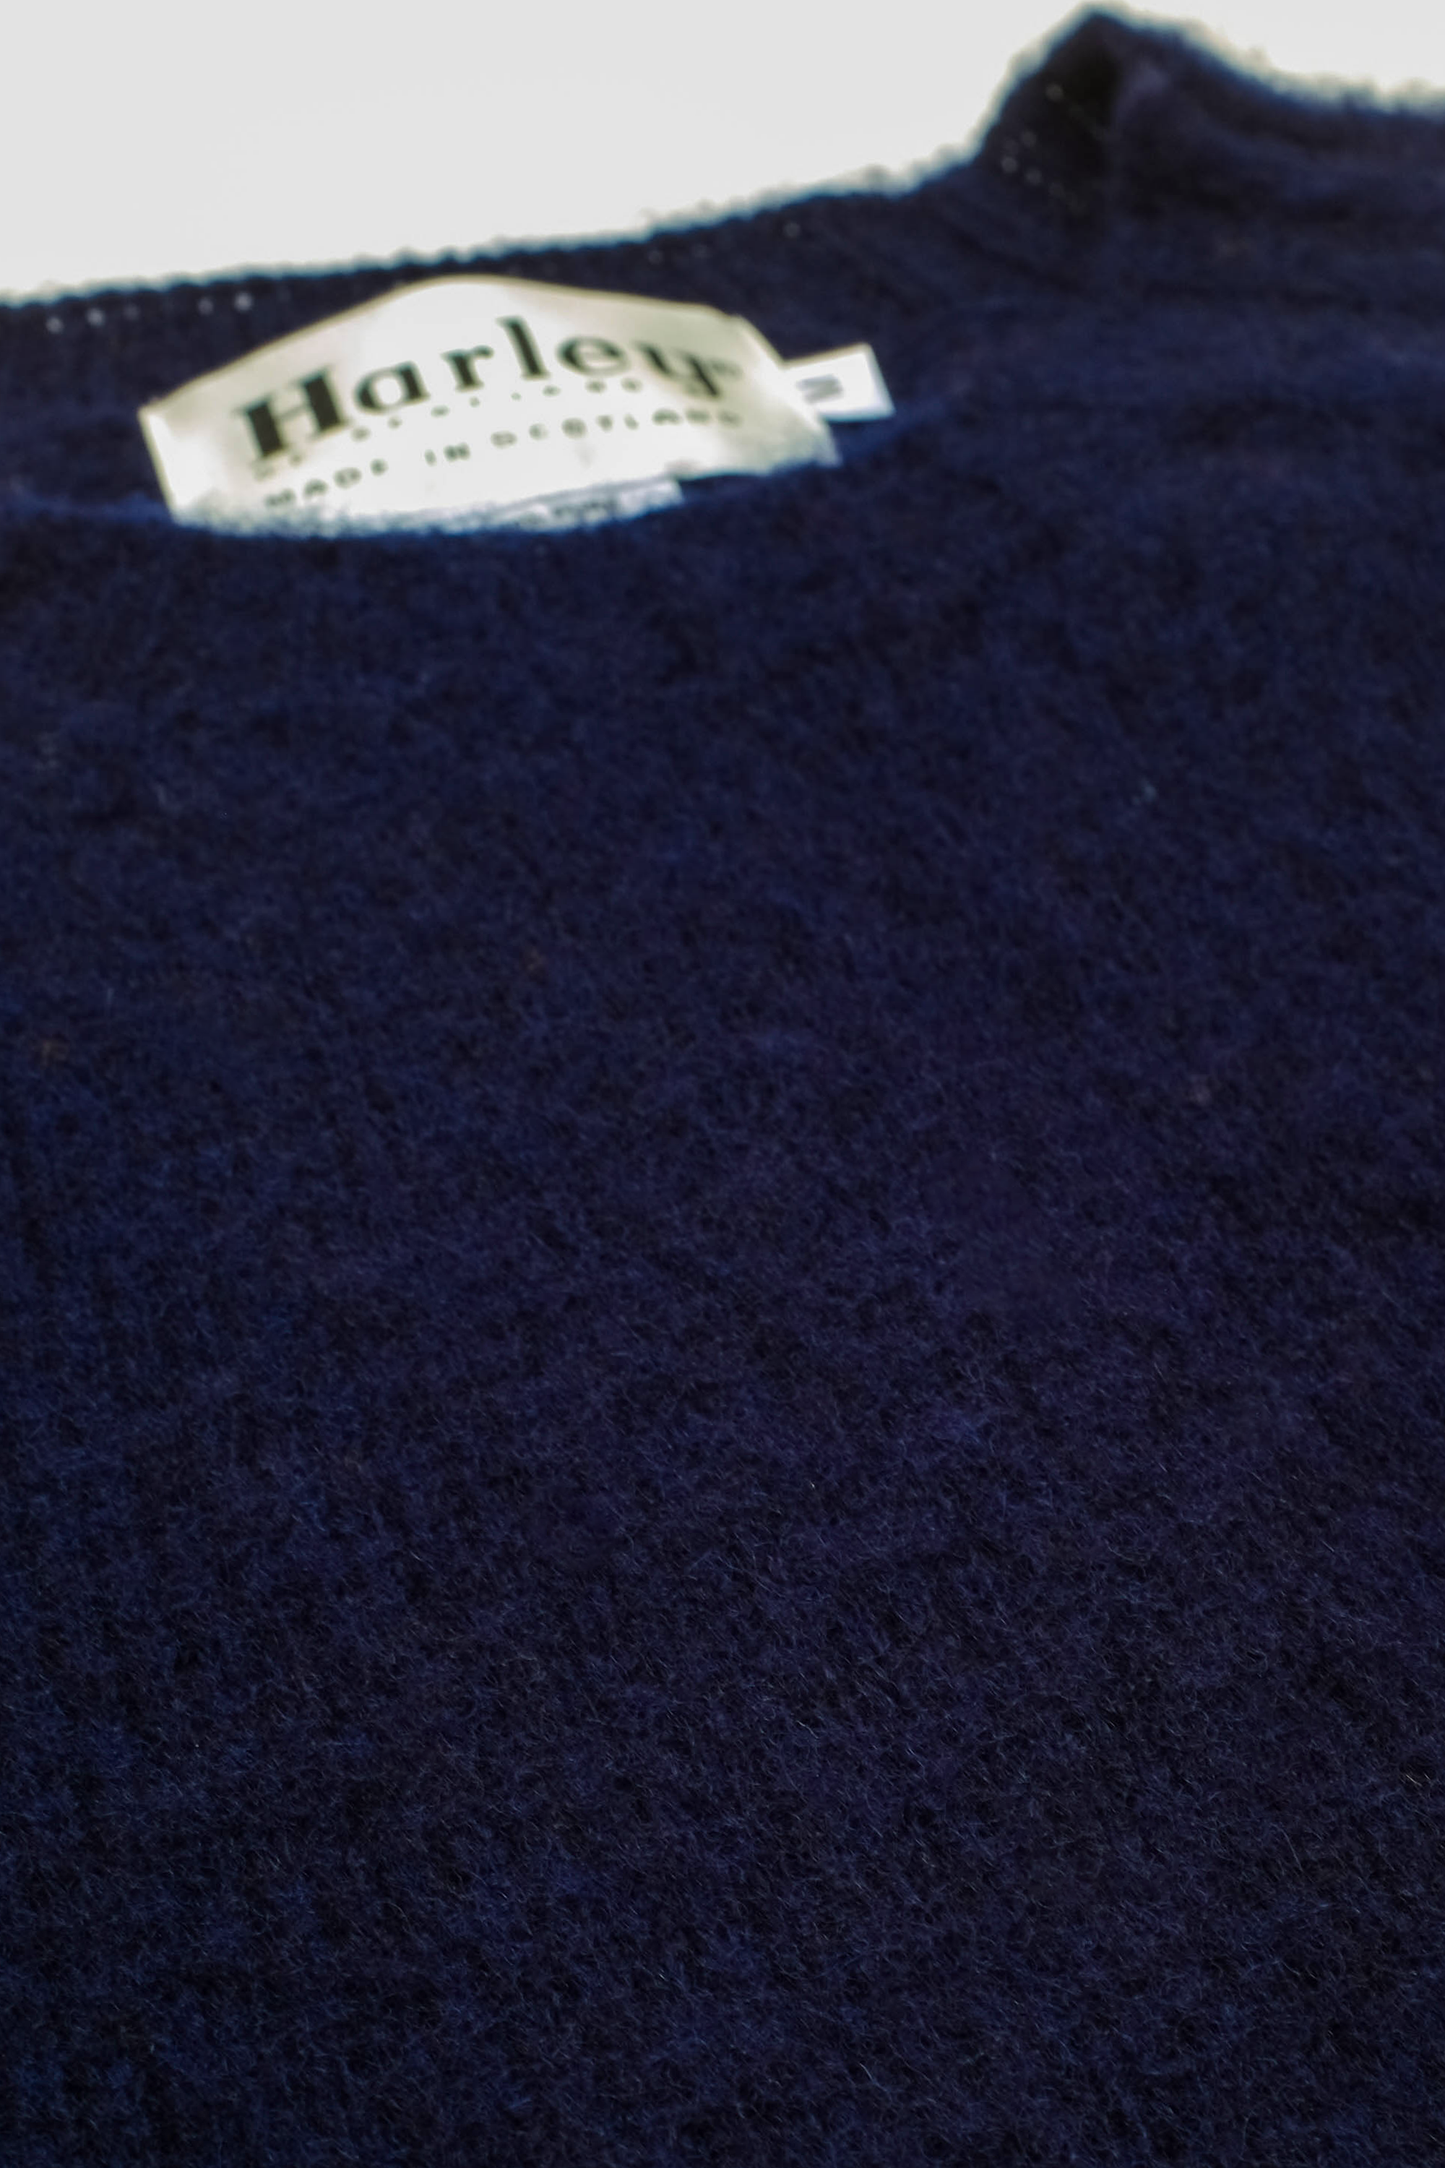 Shaggy Dog sweater in navy blue wool